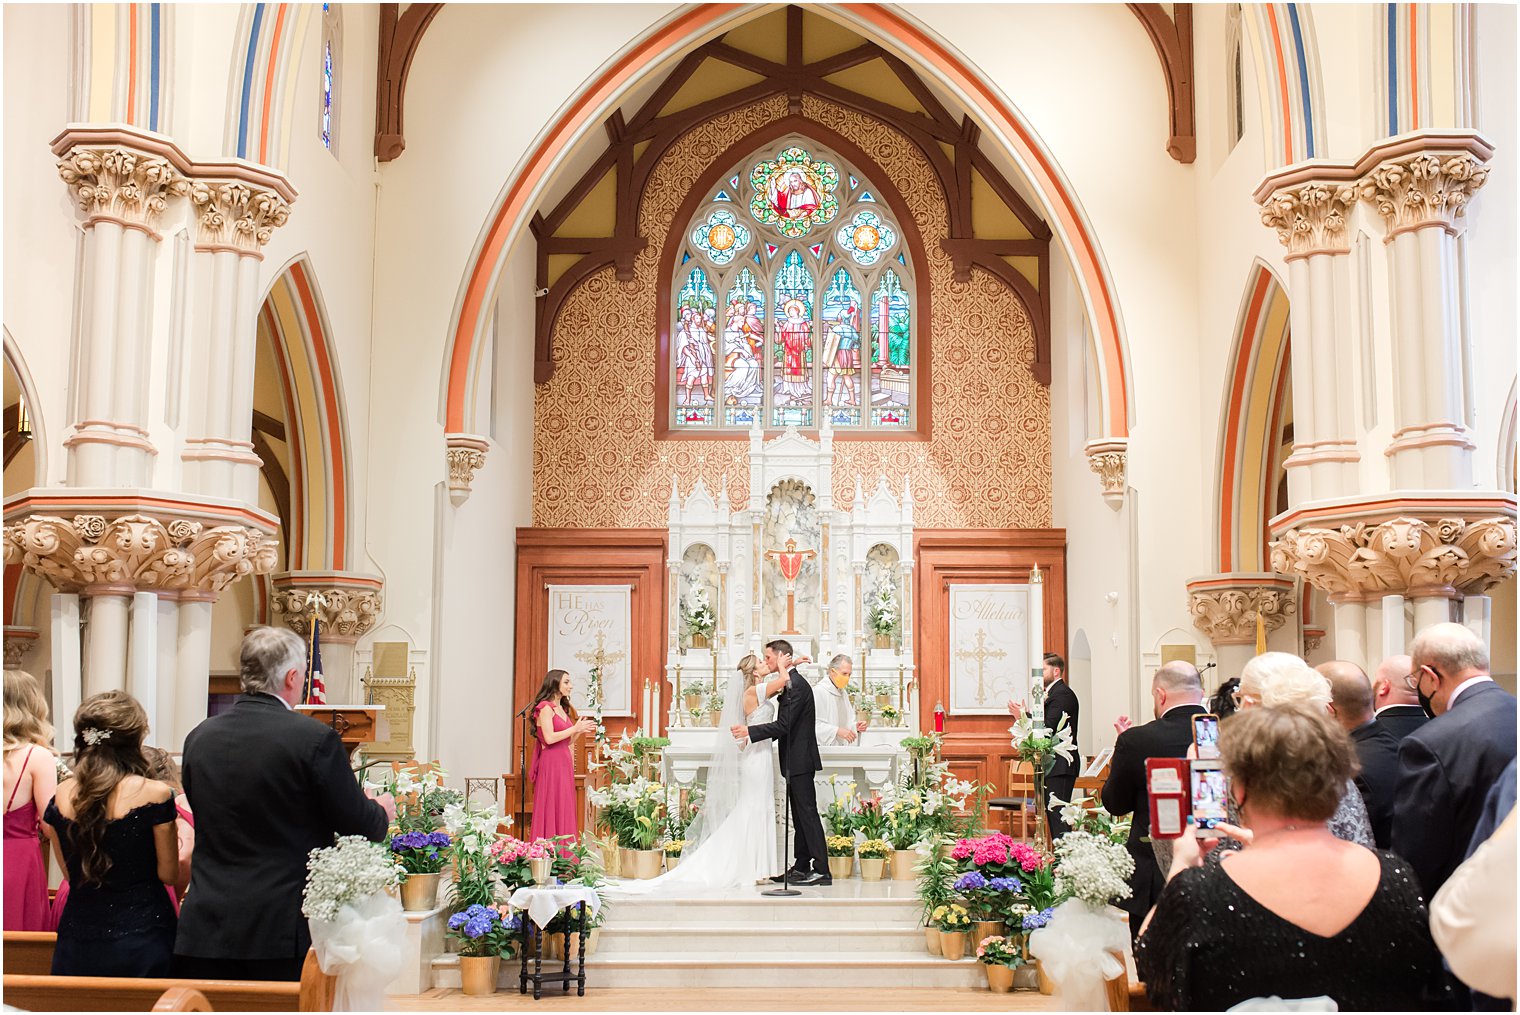 newlyweds kiss during ceremony at St. Vincent's Martyr Catholic Church